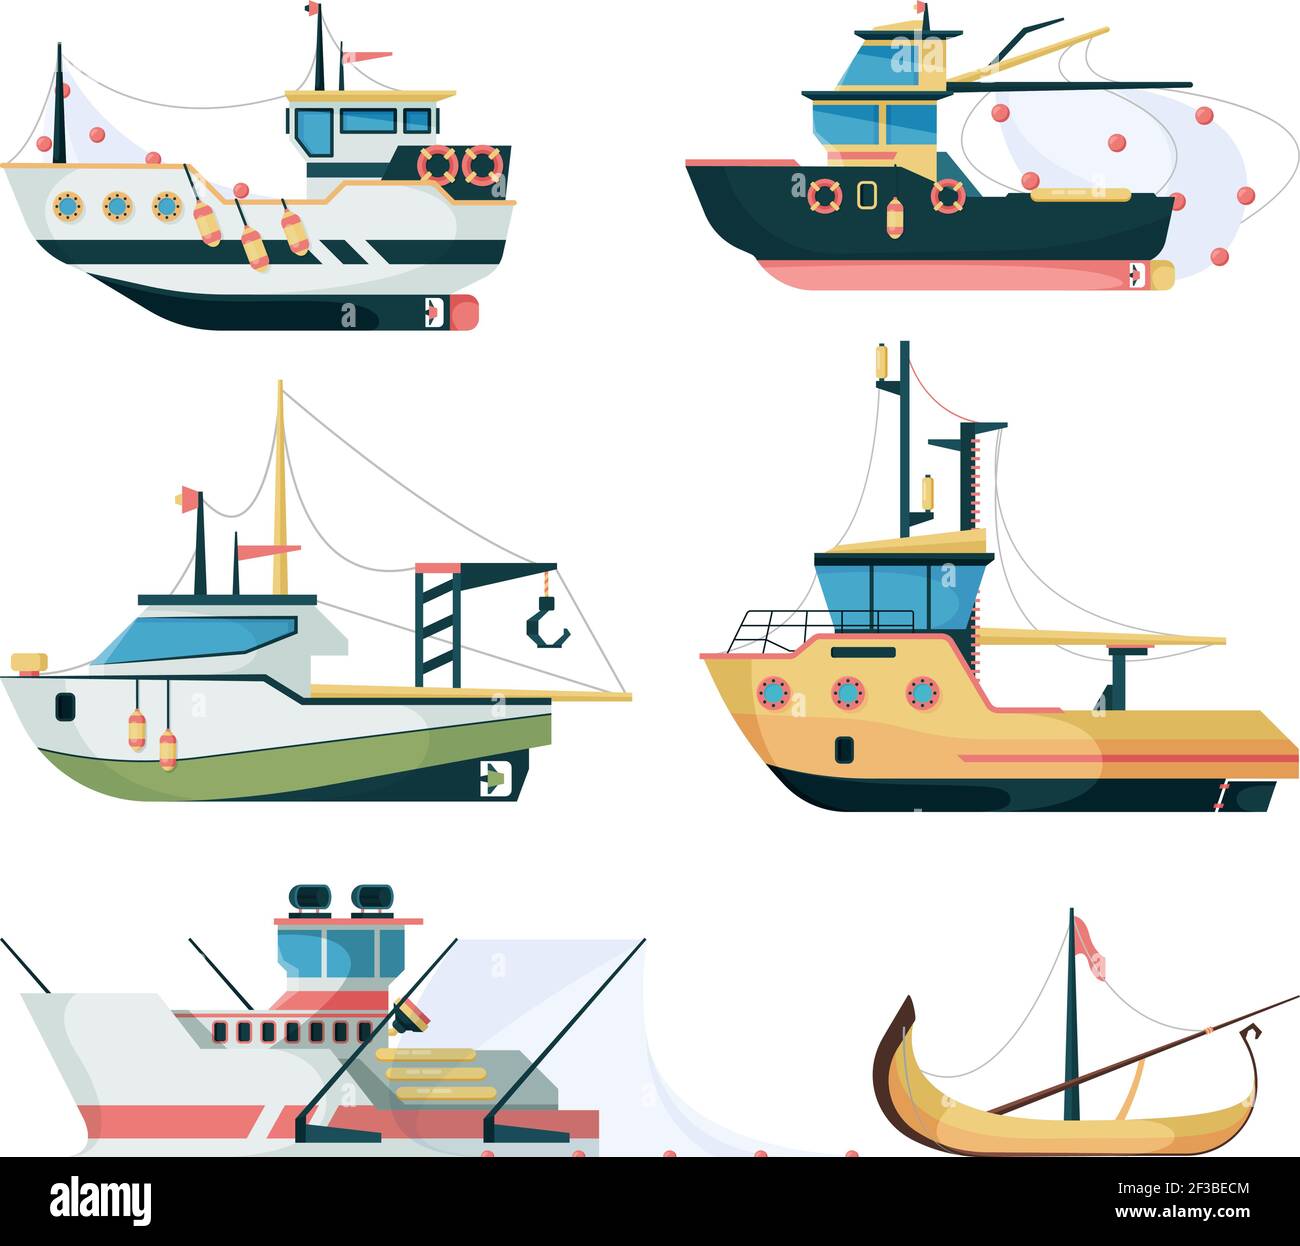 Small commercial fishing boat Stock Vector Images - Alamy